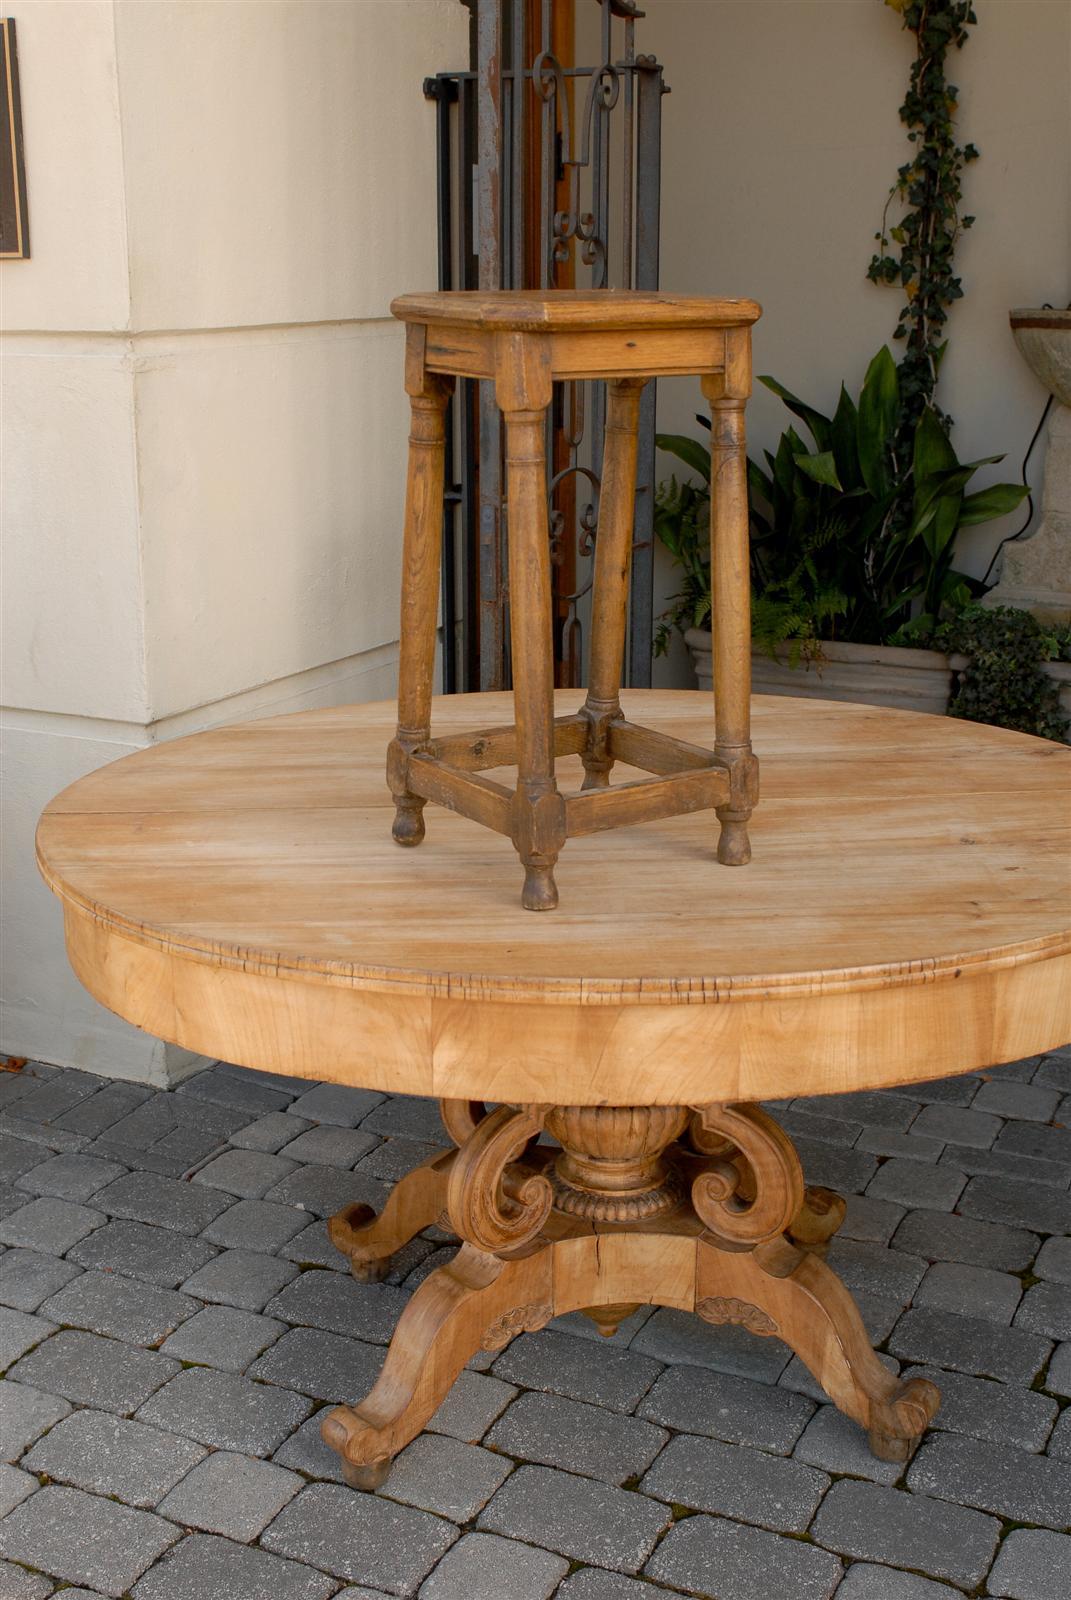 Rustic French Four Legged Pegged Stool or Pedestal from the Late 19th Century